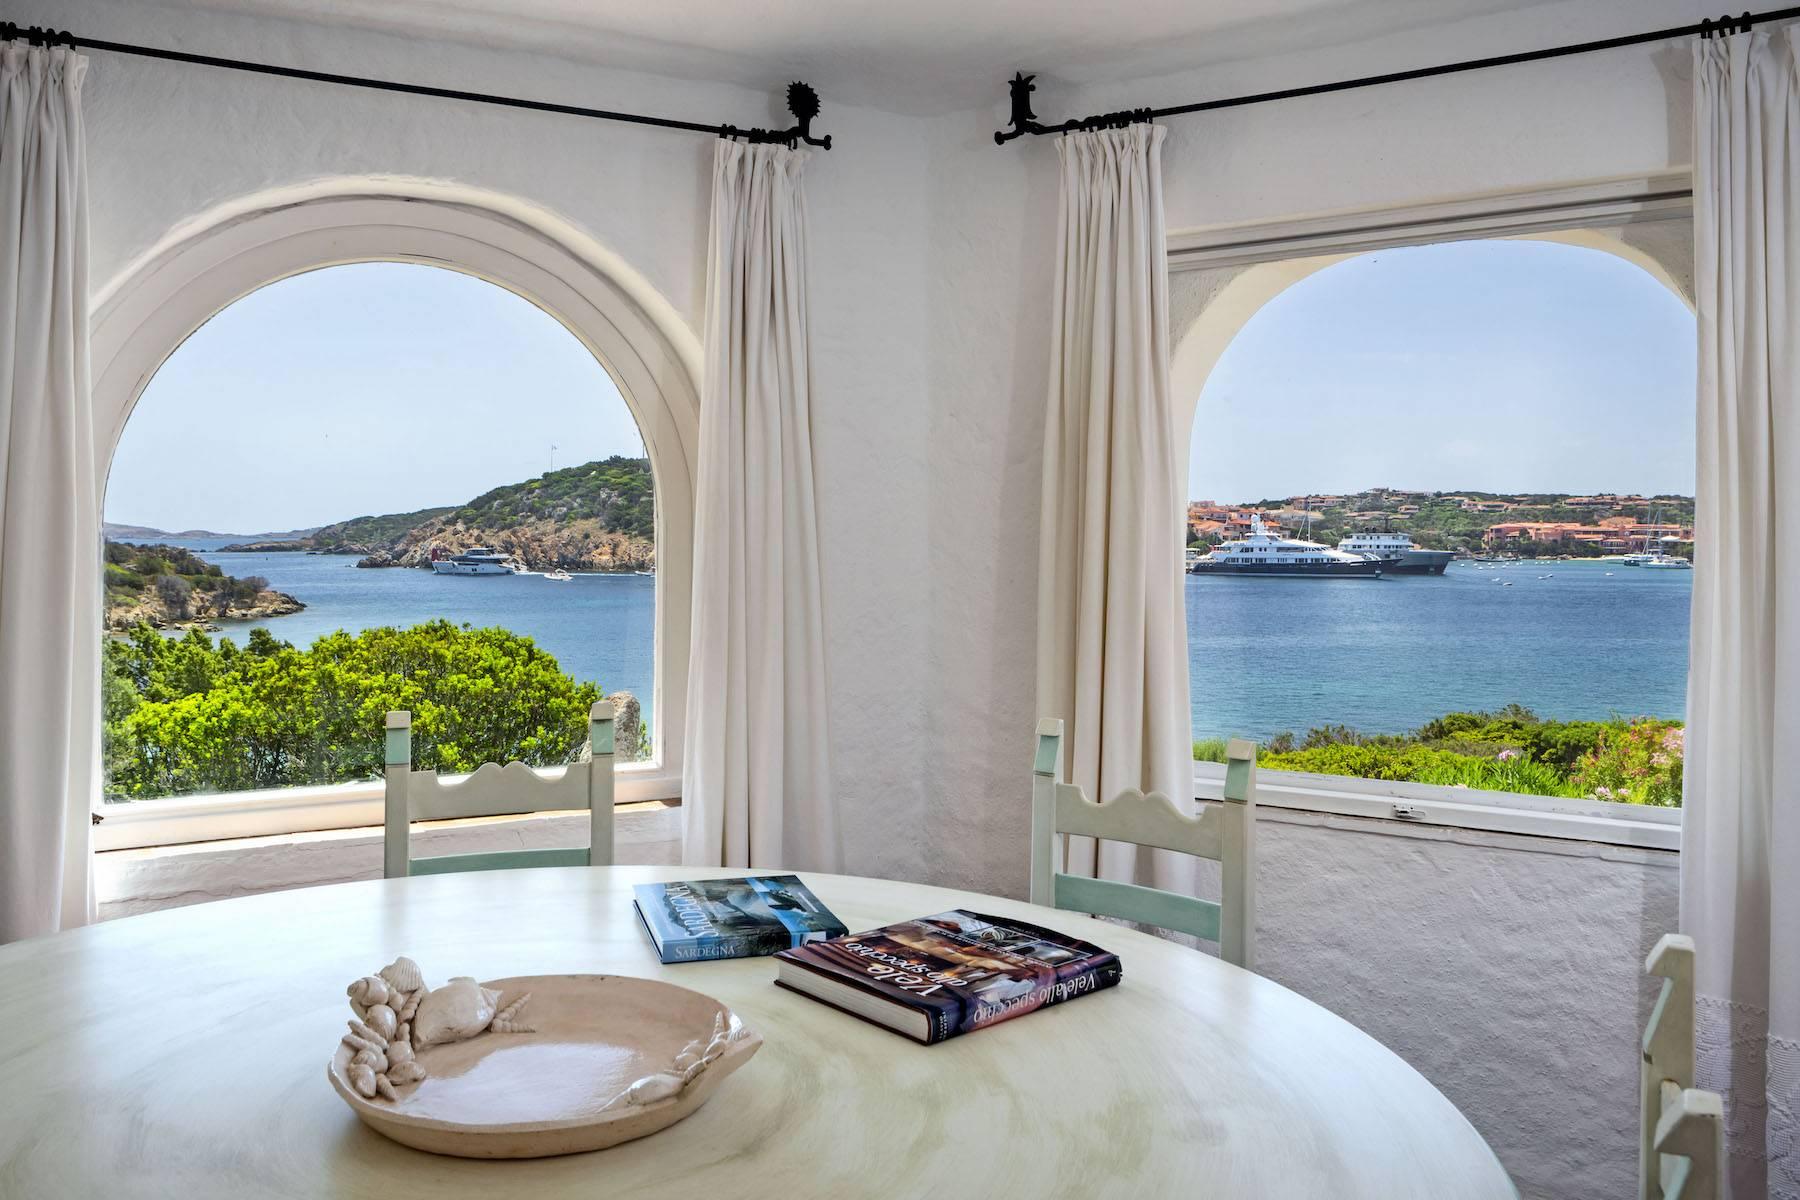 A waterfront haven.
Your Private Window Between Sea And Sky - 17